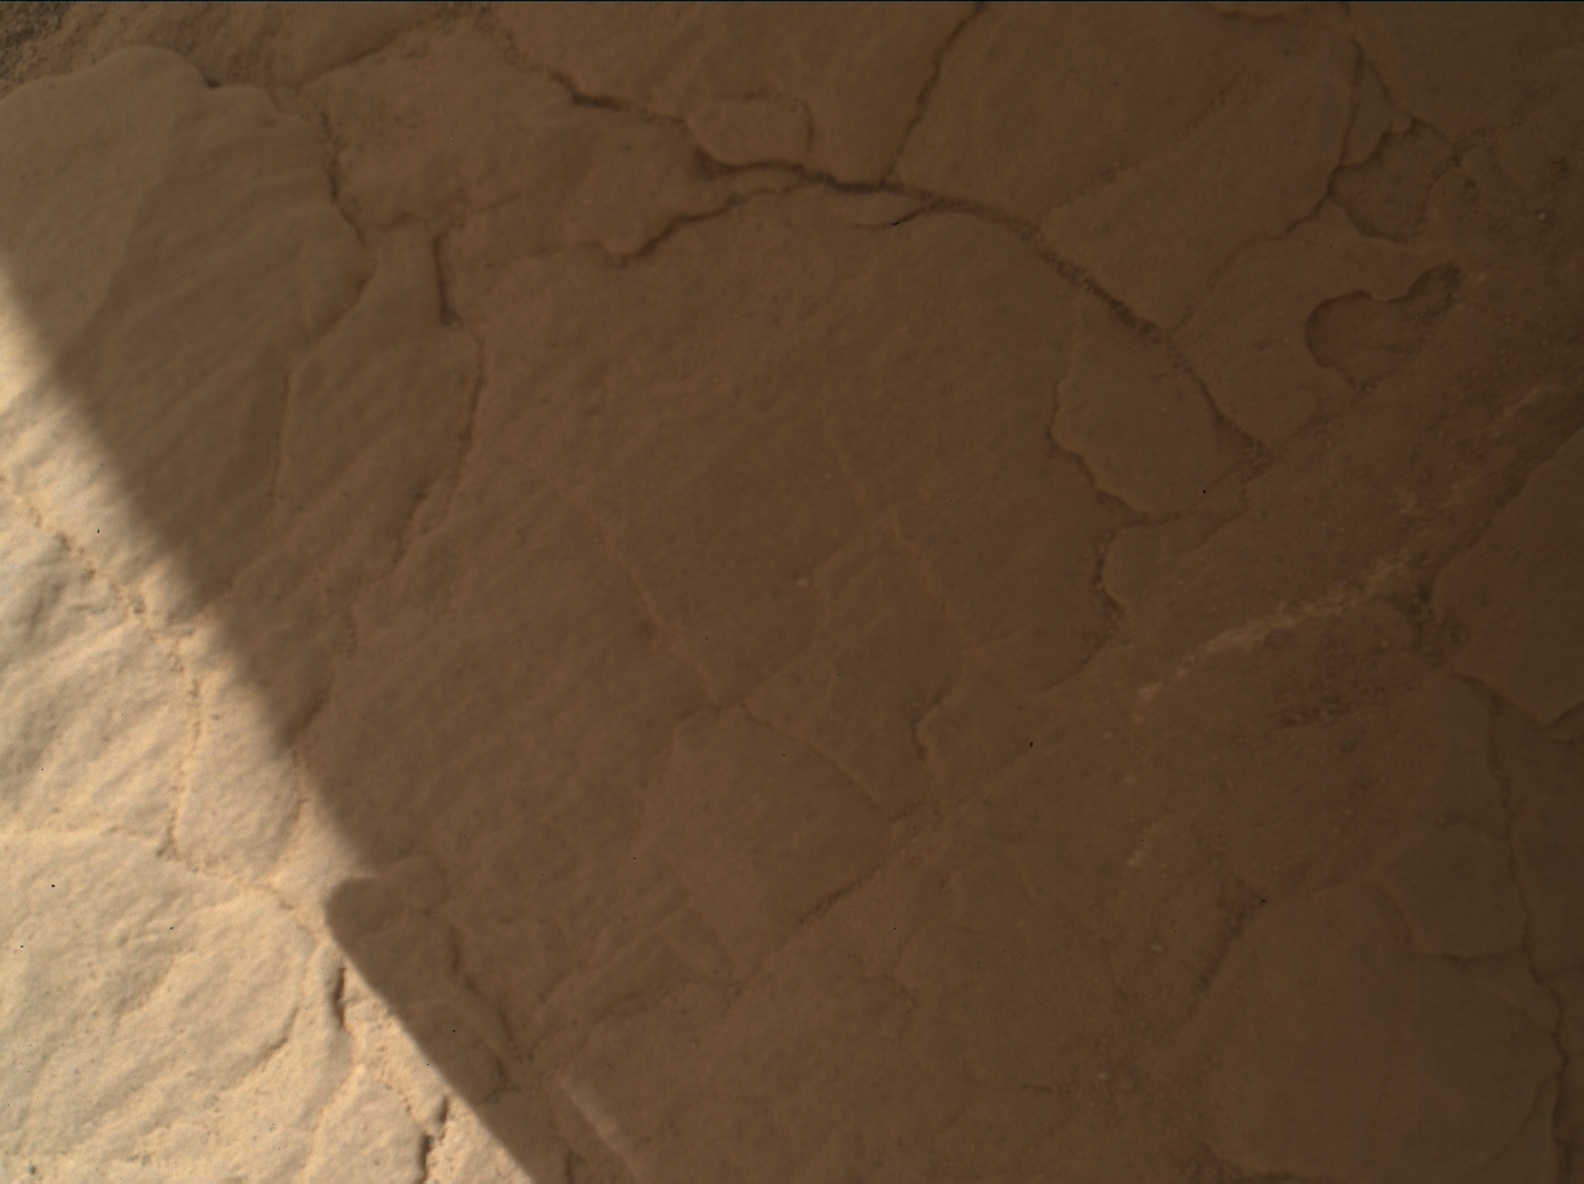 Nasa's Mars rover Curiosity acquired this image using its Mars Hand Lens Imager (MAHLI) on Sol 2570